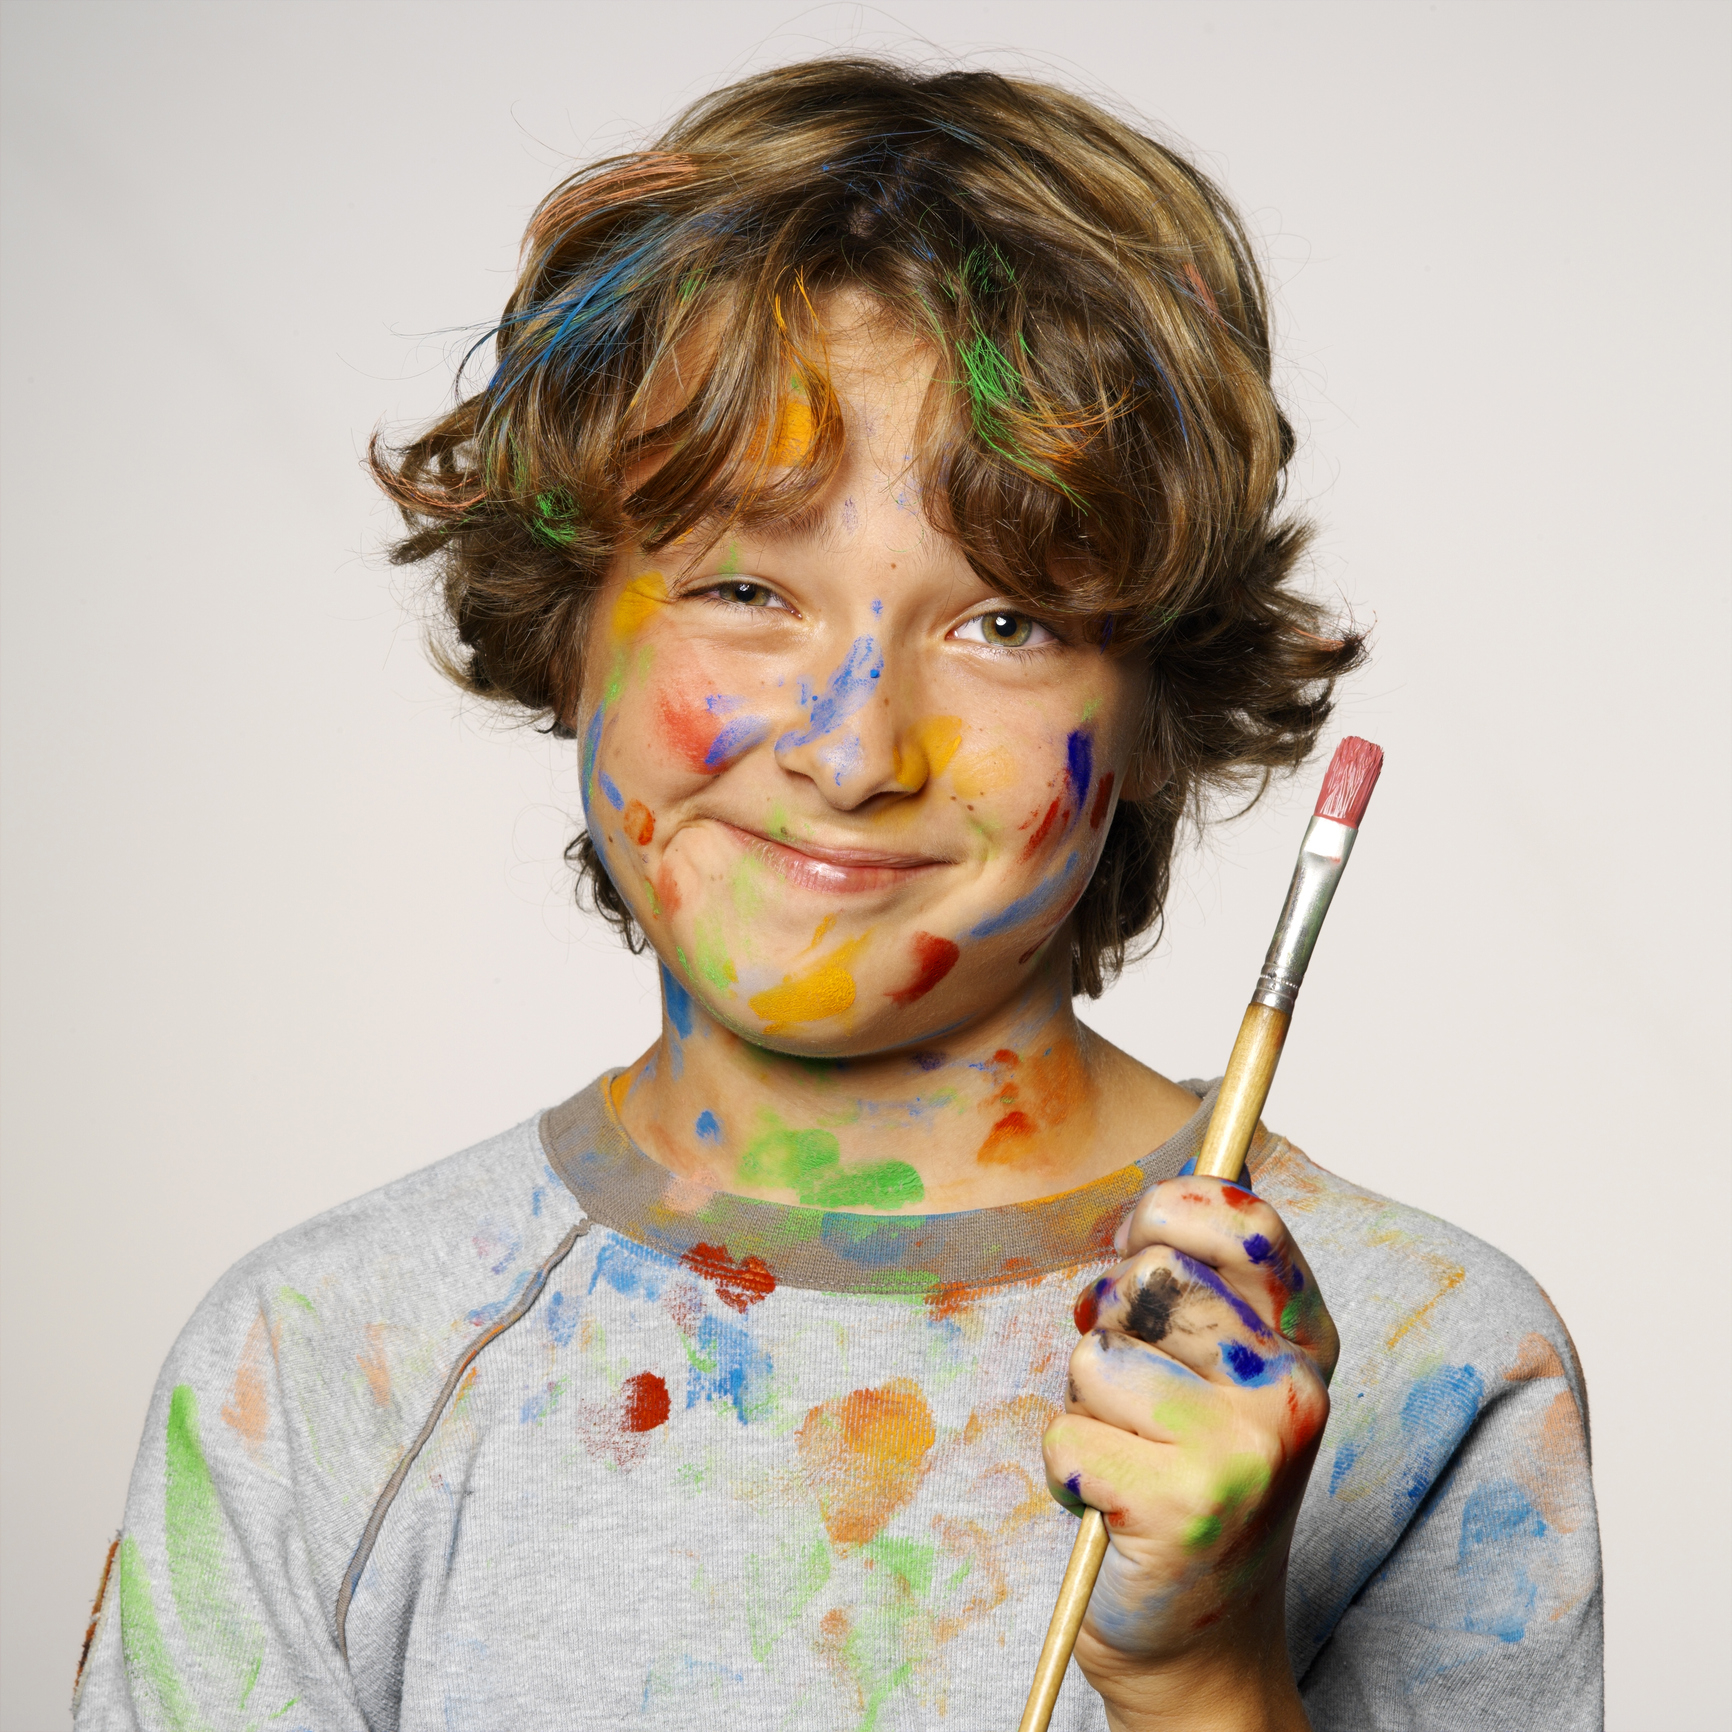 A boy covered in paint